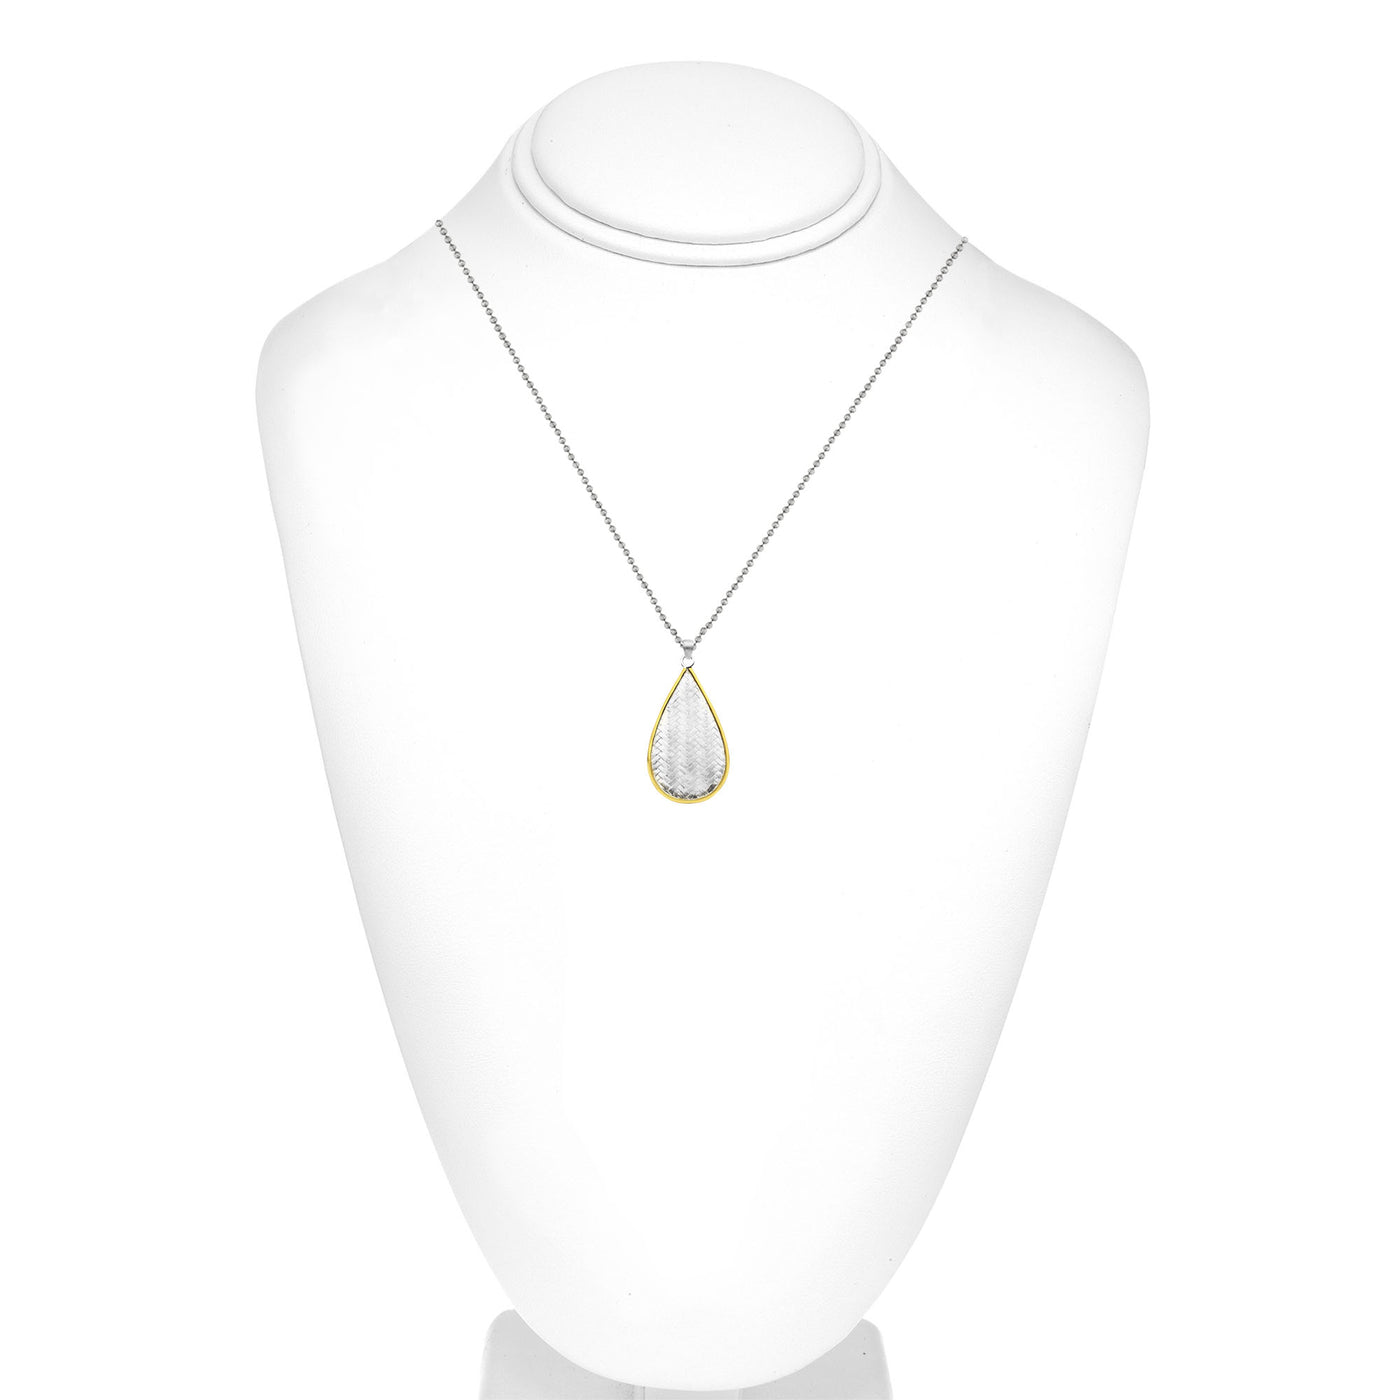 Gold Plated Sterling Silver Tear Drop Woven Basketweave Pendant with Chain